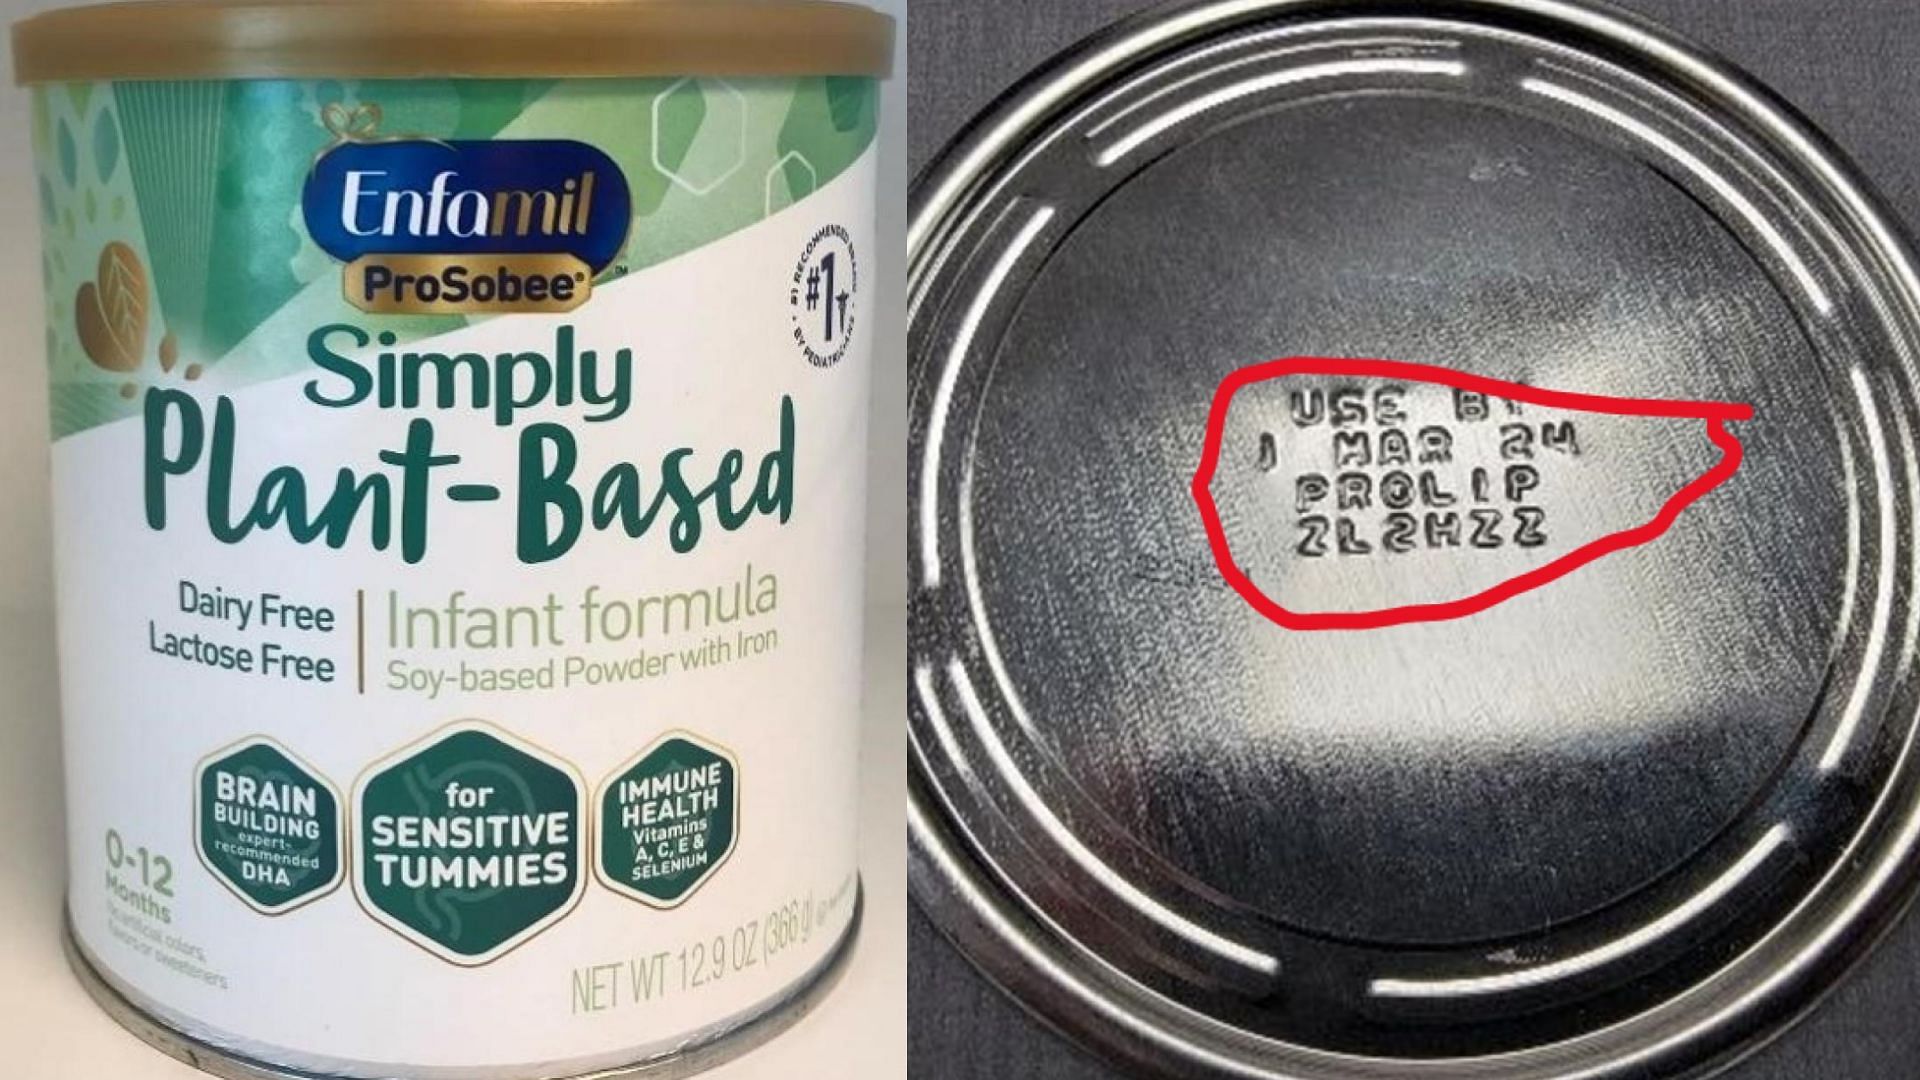 the details printed on the bottom of the recalled Enfamil Prosobee infant formula cans (Image via FDA)